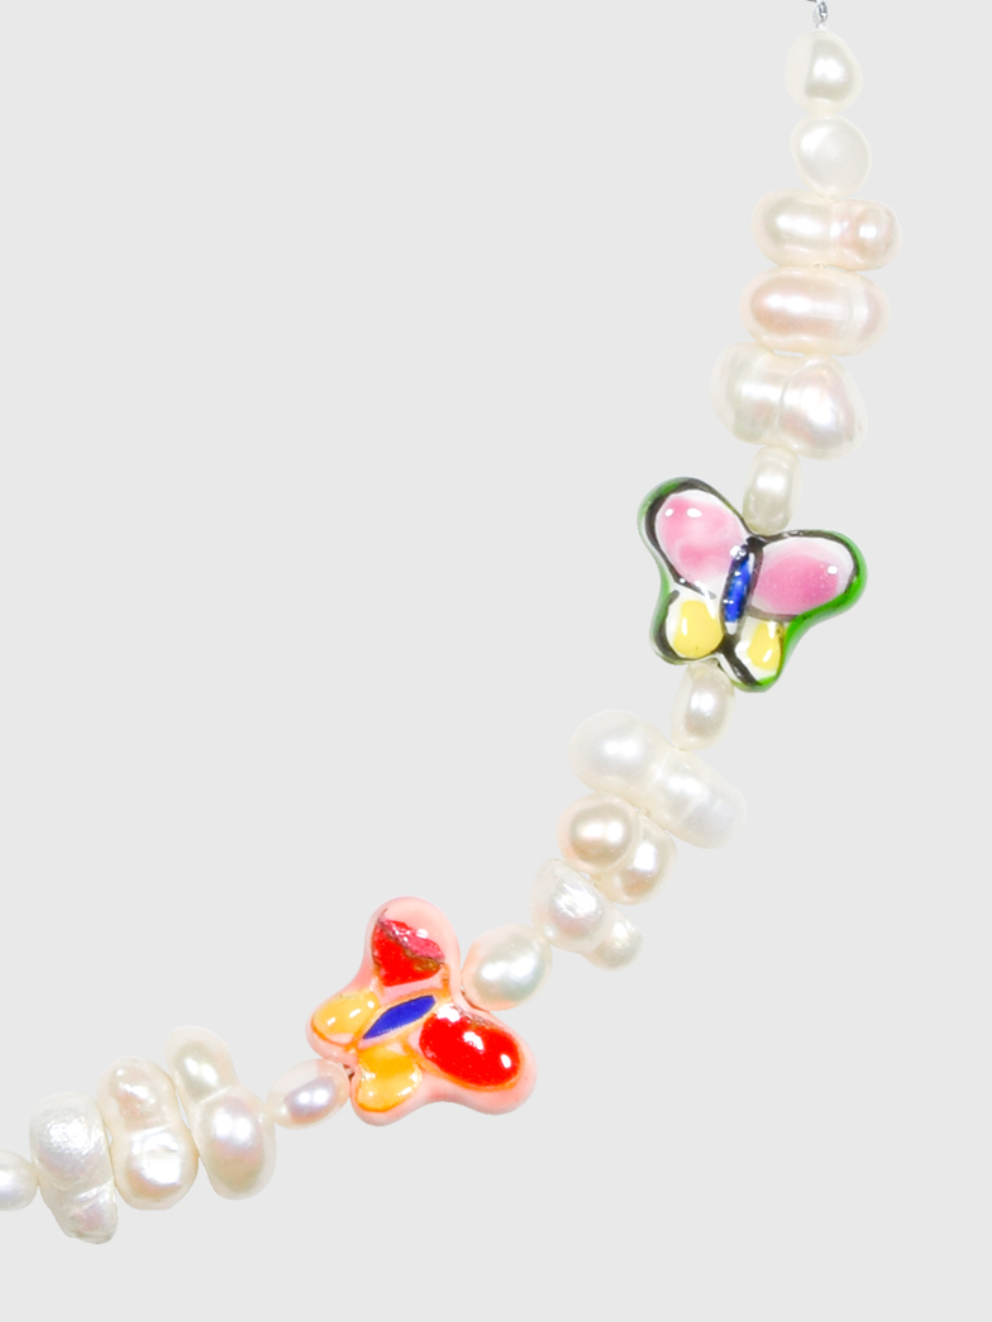 AWE Cloud Butterfly Pearl Necklace